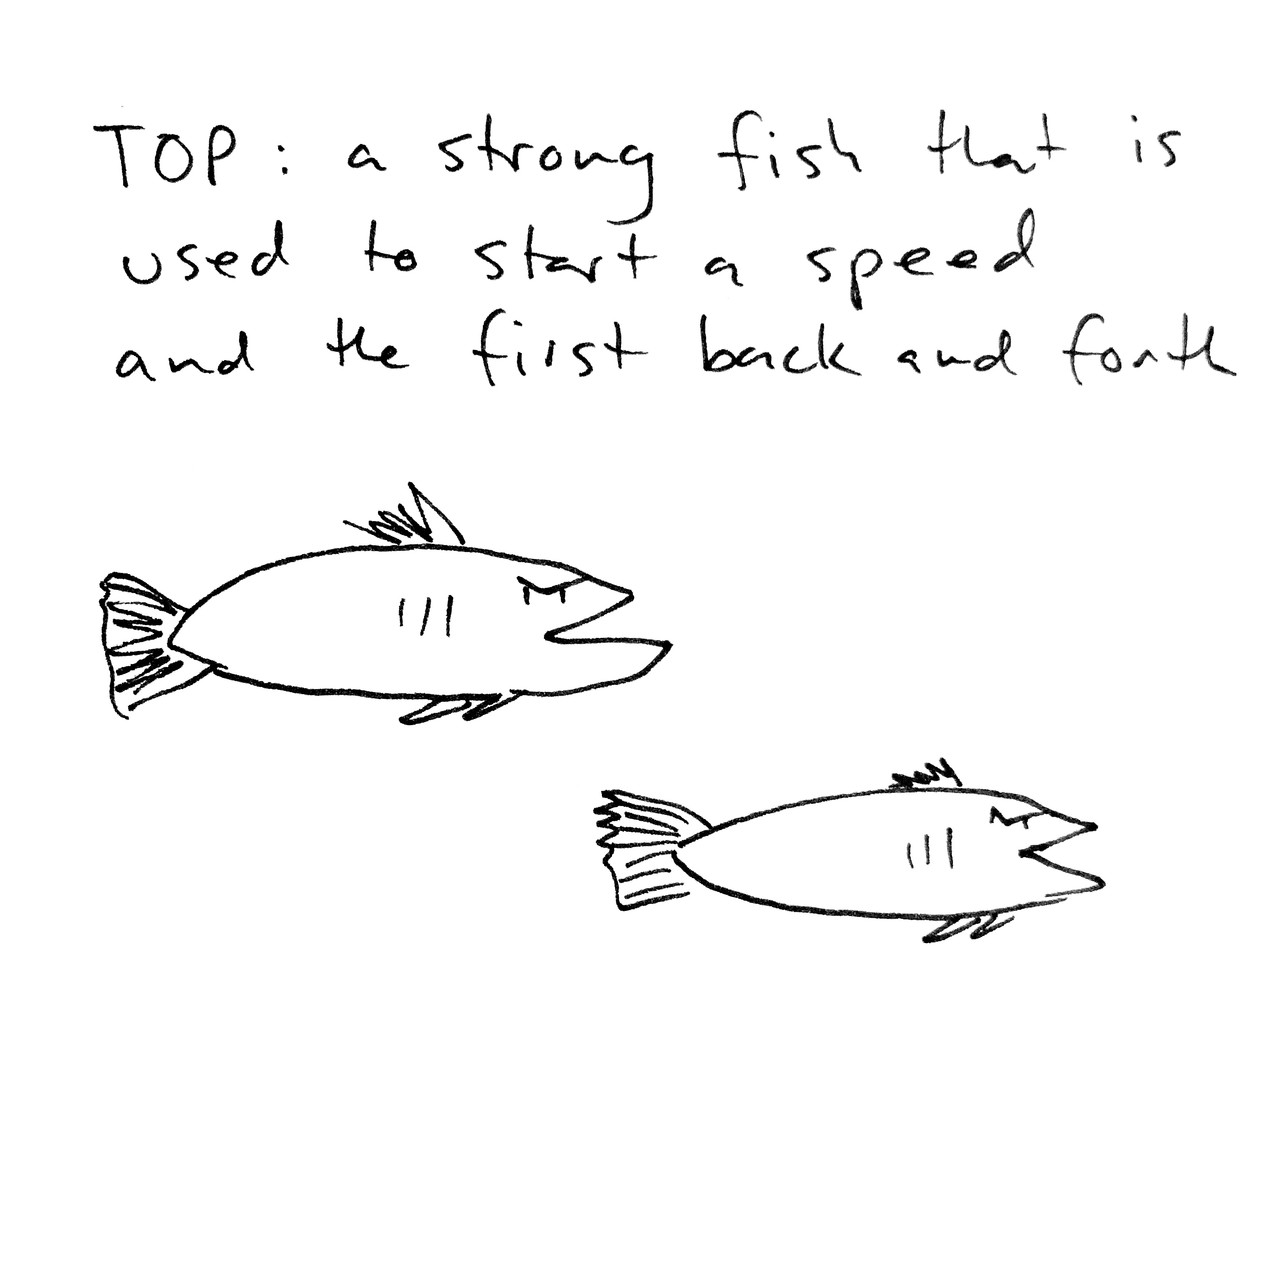 TOP: a strong fish that is used to start a speed and the first back and forth. The drawing depicts two fish swimming from left to right, one in the top left and the other in the bottom right of the frame.